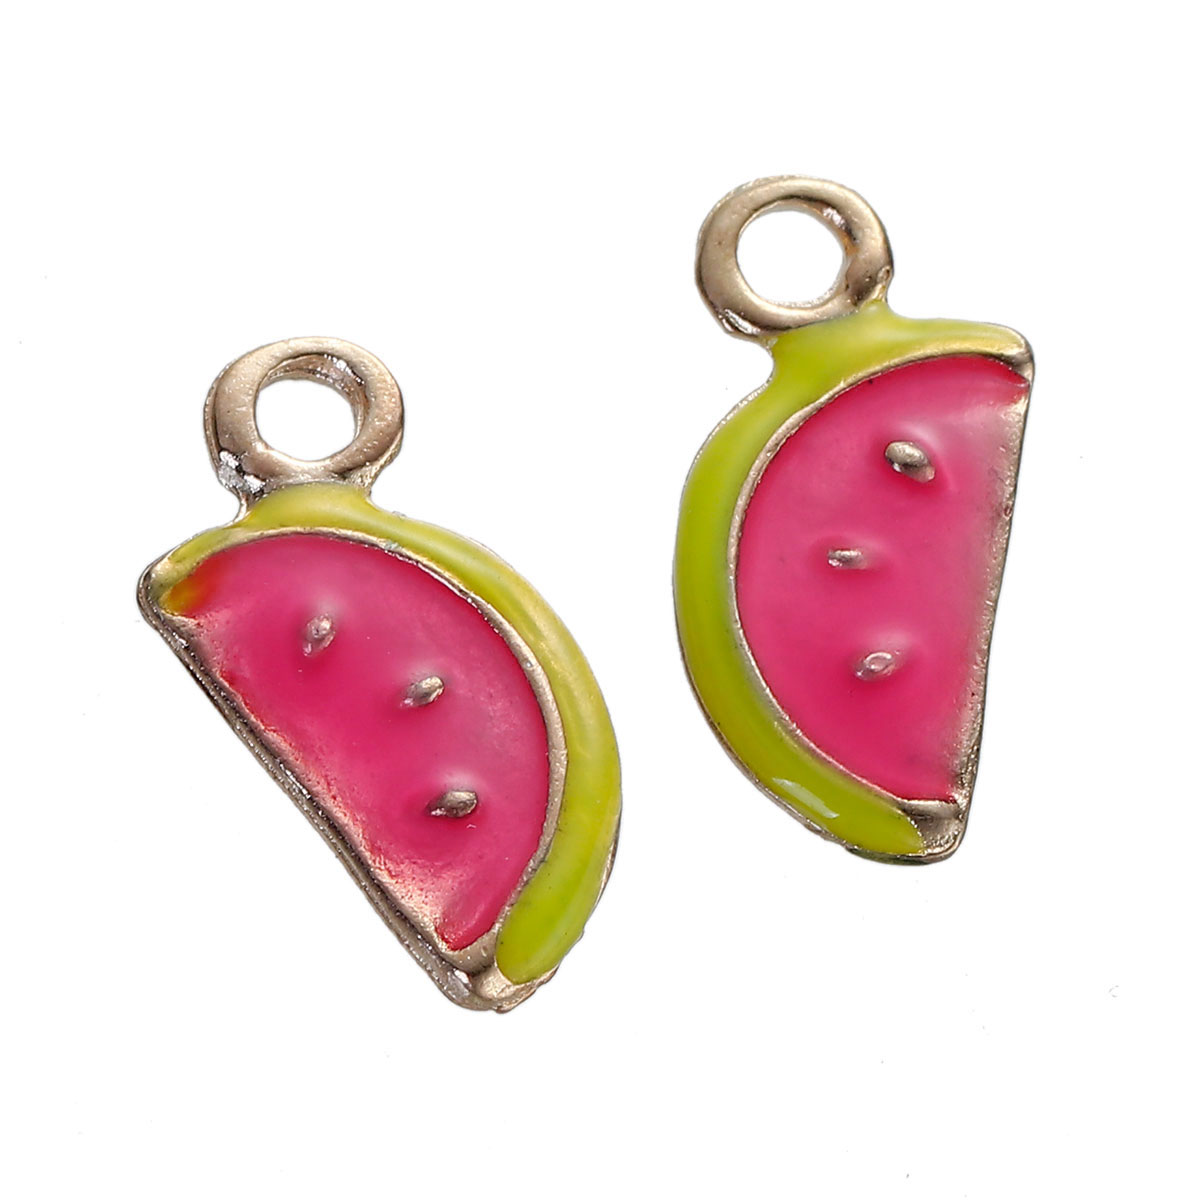 Picture of Zinc Based Alloy Charms Watermelon Fruit Gold Plated Red & Green Enamel 17mm( 5/8") x 8mm( 3/8"), 5 PCs